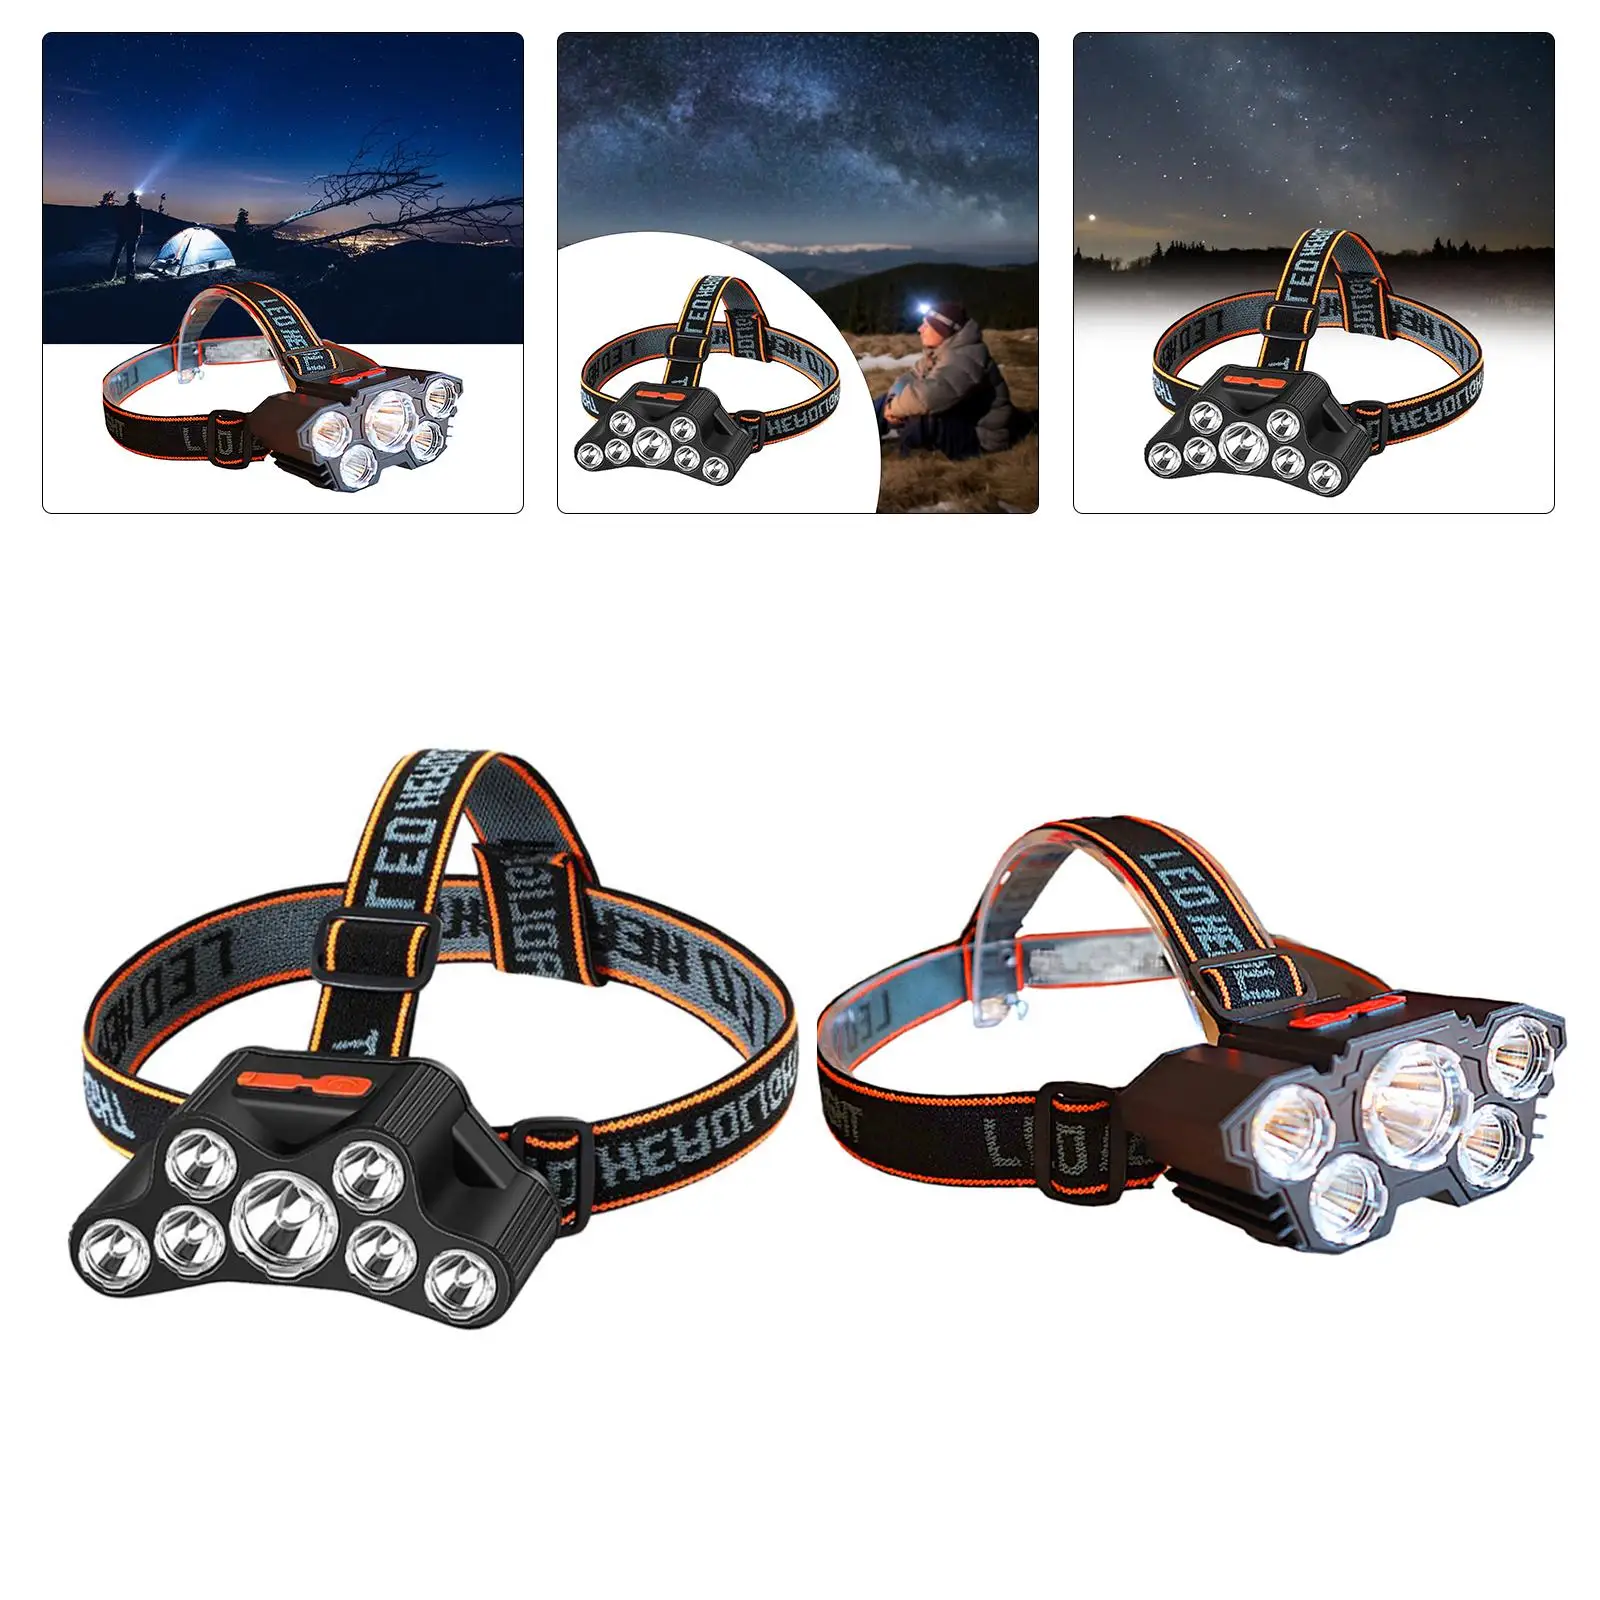 LED Headlamp Waterproof Hands-Free 90 Degrees Rotate USB Rechargeable Head Lamp for Outdoor Hiking Jogging with USB Line Lantern